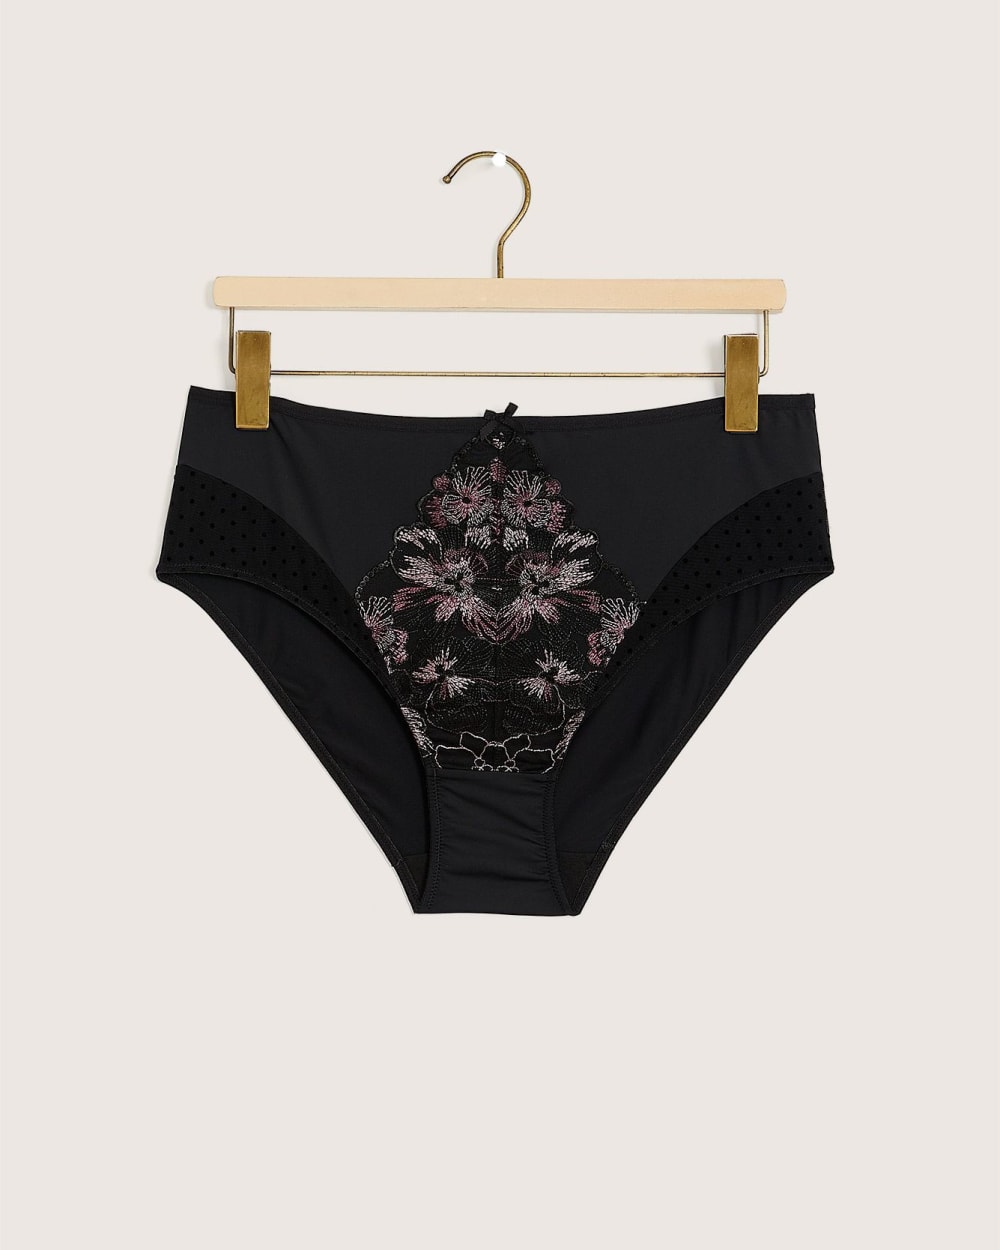 Black High-Cut Brief With Floral Embroidery and Polka-Dot Mesh - Déesse Collection